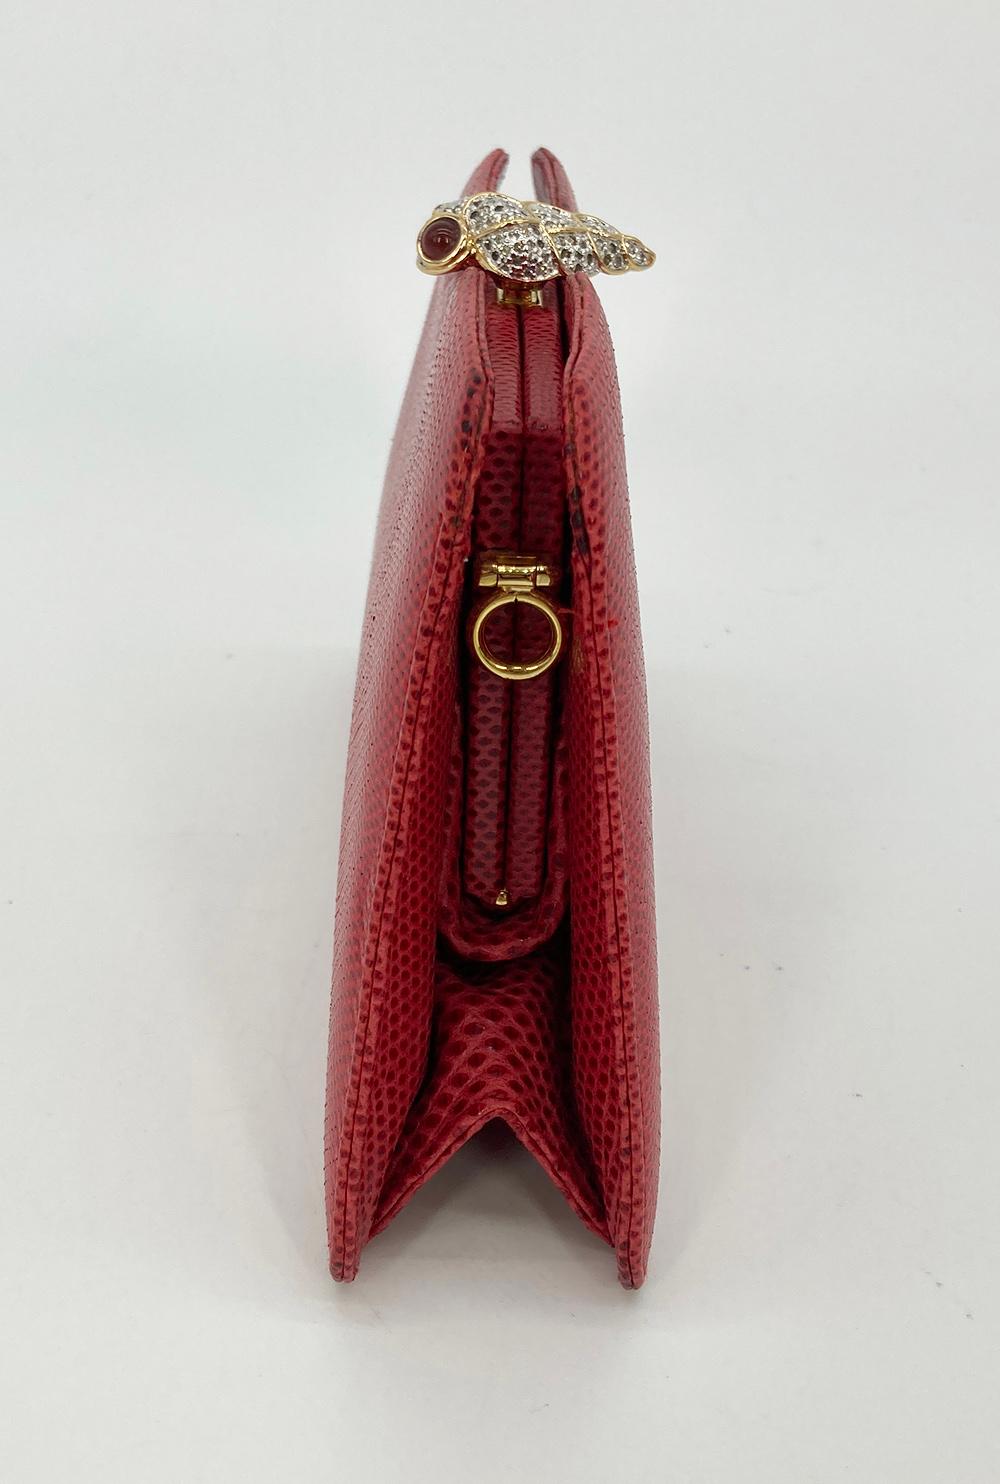 Judith Leiber Red Lizard Crystal Shell Top Clutch in excellent condition. Red lizard leather exterior trimmed with gold hardware and swarovski crystal embellished shell top closure. Push button closure opens to a red satin interior with one slit